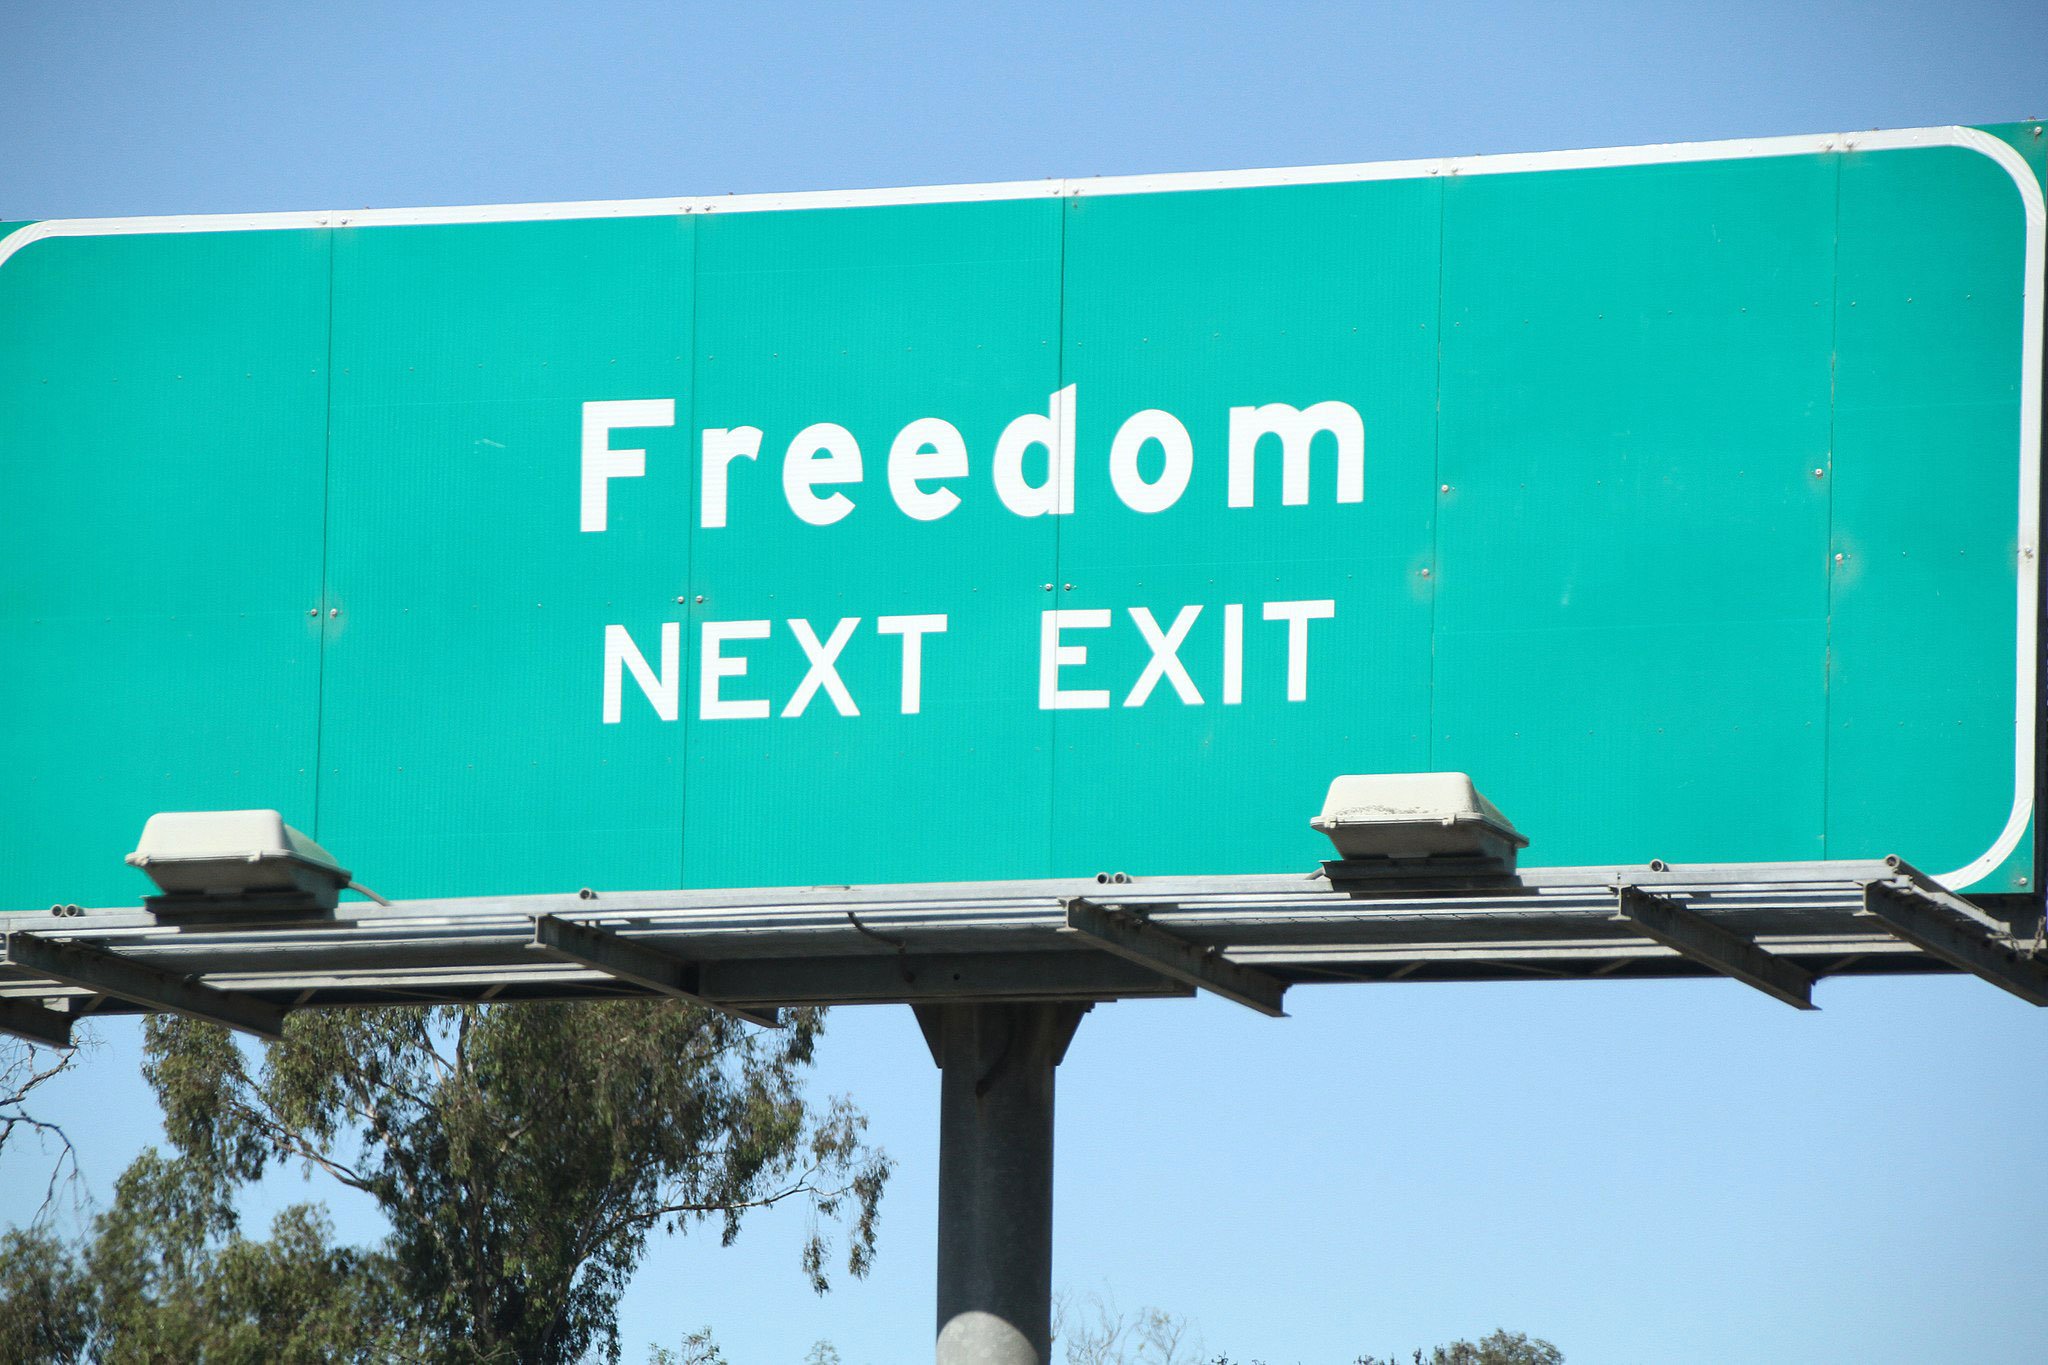 Next exit poster. Next and exit picture. Freedom support